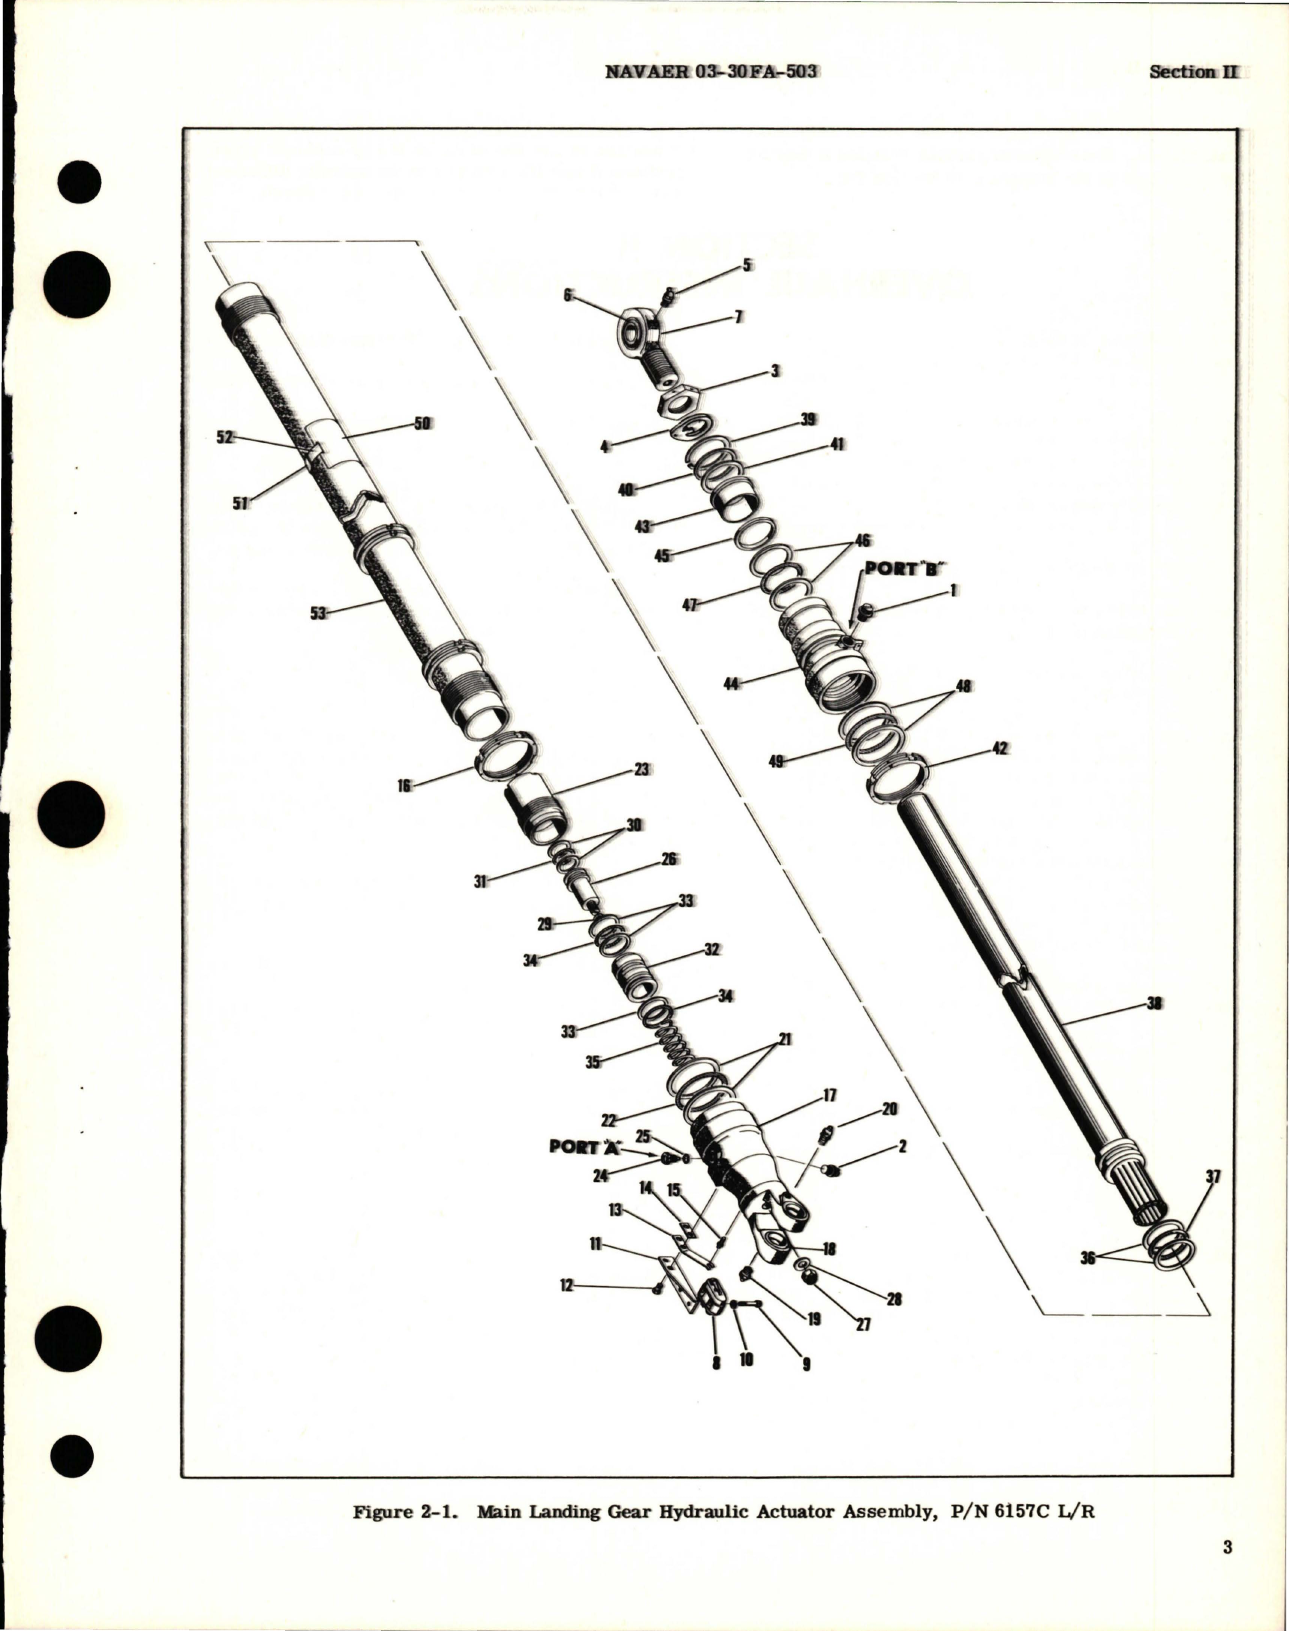 Sample page 5 from AirCorps Library document: Overhaul Instructions for Main Landing Gear Hydraulic Actuator Assembly - Parts 6157C L-R, 6157D L-R, 6157E L-R, and 6157F L-R